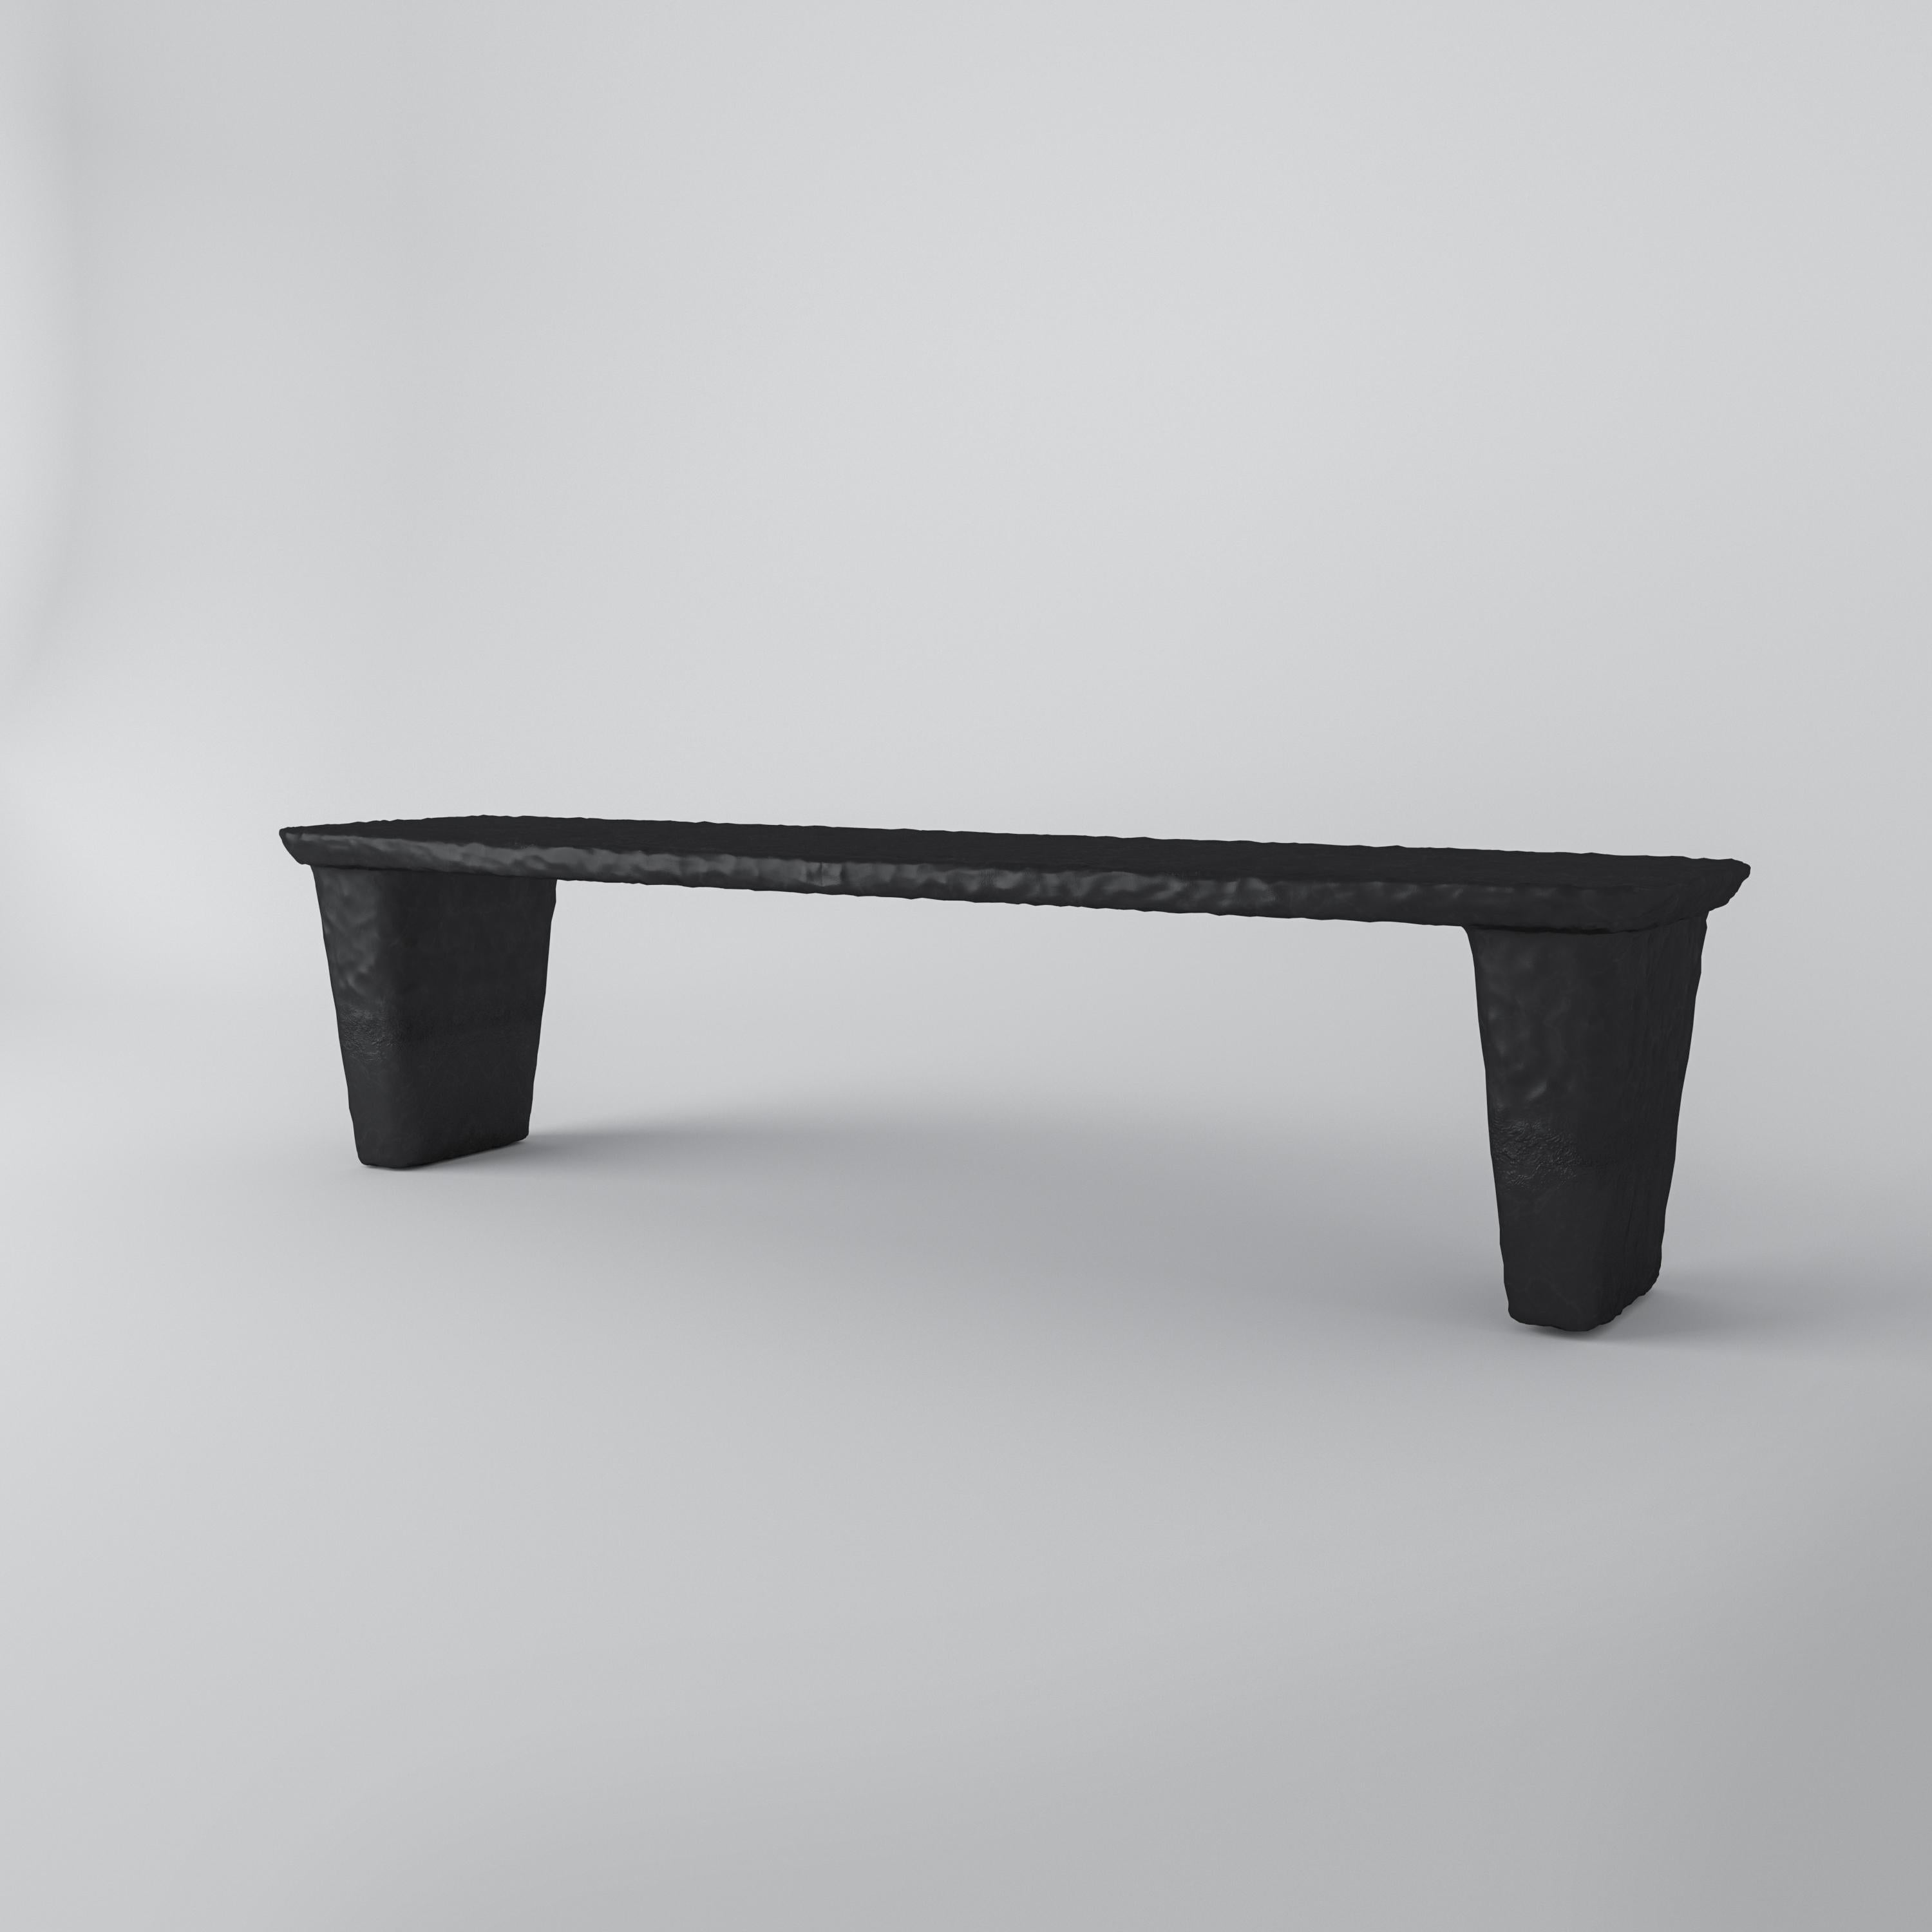 Sculpted contemporary coffee table by FAINA
Design: Victoriya Yakusha
Material: Steel, flax rubber, biopolymer, cellulose
Dimensions and weight
120 x 30 x 30 cm
24 kg
Outdoor Finish available

Made in the style of ethnic minimalism, the